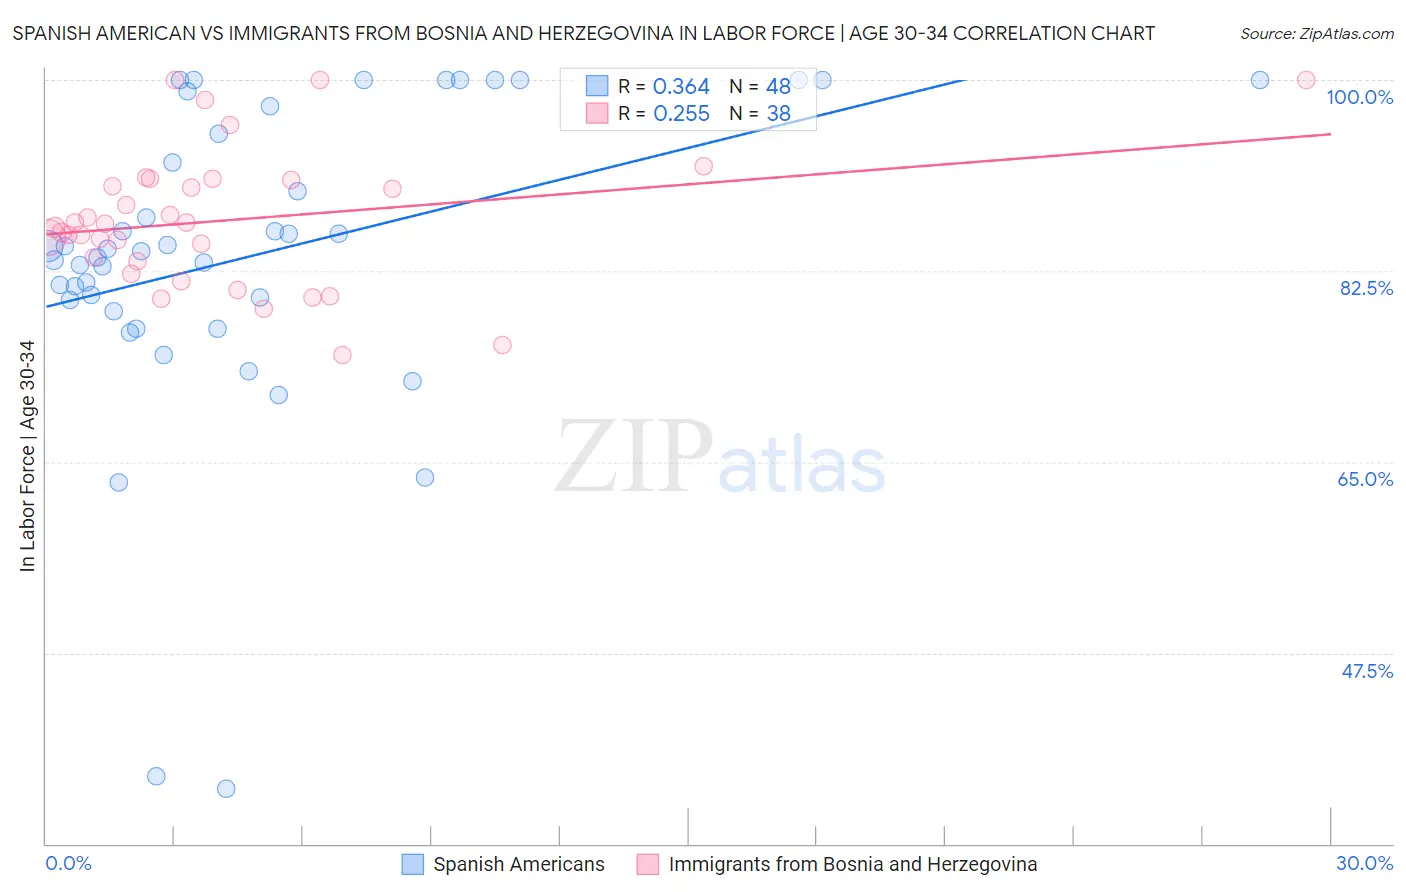 Spanish American vs Immigrants from Bosnia and Herzegovina In Labor Force | Age 30-34